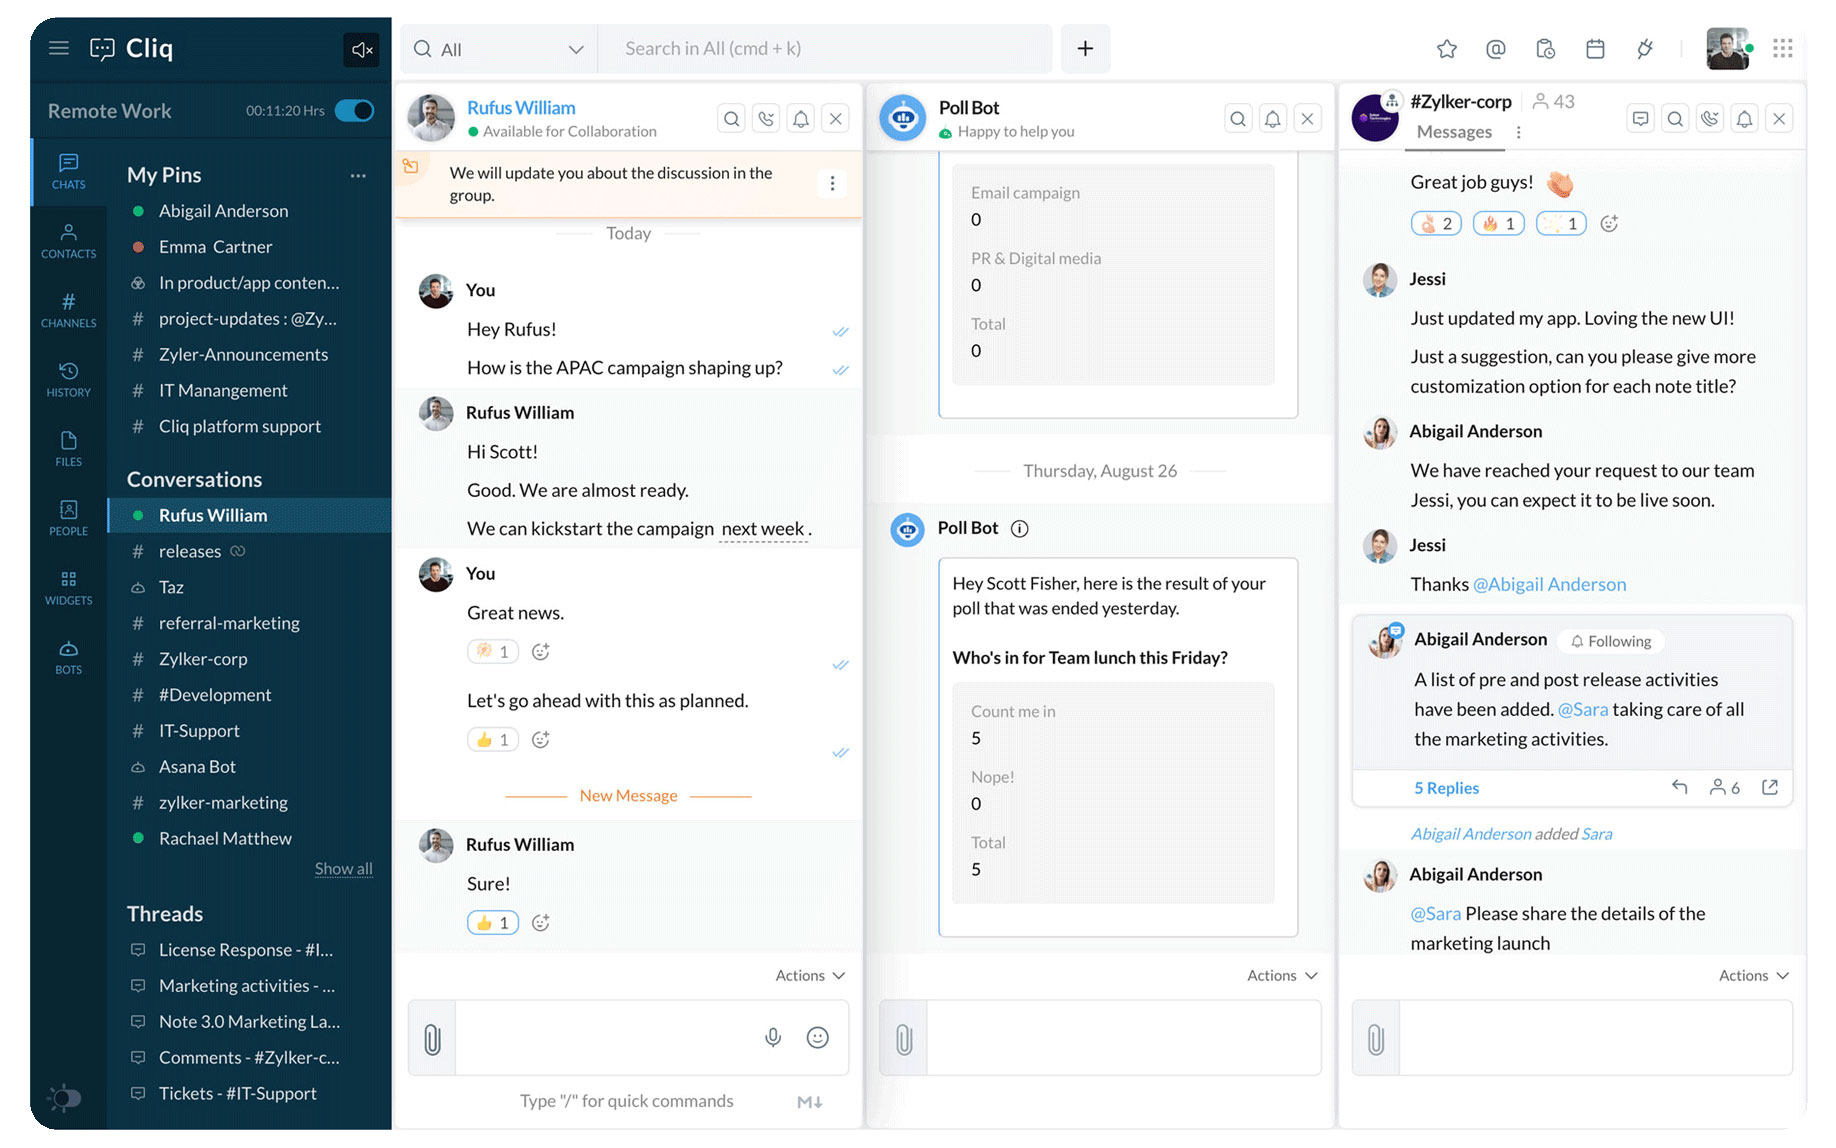 Team collaboration is easier with Cliq's multi-chat view